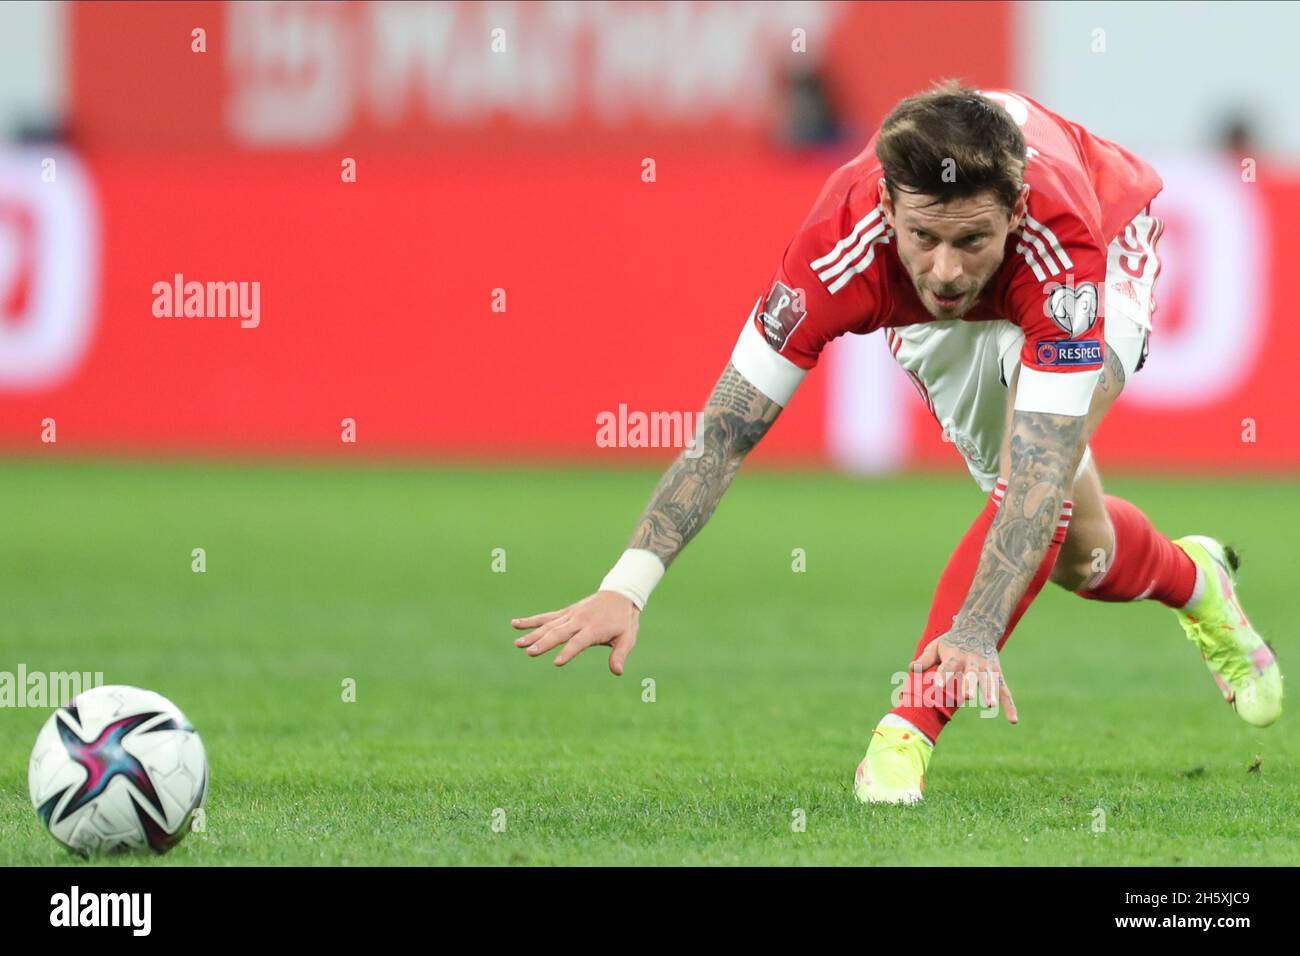 St Petersburg, Russia. 11th Nov, 2021. SAINT PETERSBURG, RUSSIA - NOVEMBER 11: Fedor Smolov of Russia National Team during the World Cup 2022 Qualifying match between Russia and Cyprus at Gazprom Arena on November 11, 2021 in Saint Petersburg, Russia (Photo by Anatoliy Medved/Orange Pictures) Credit: Orange Pics BV/Alamy Live News Stock Photo